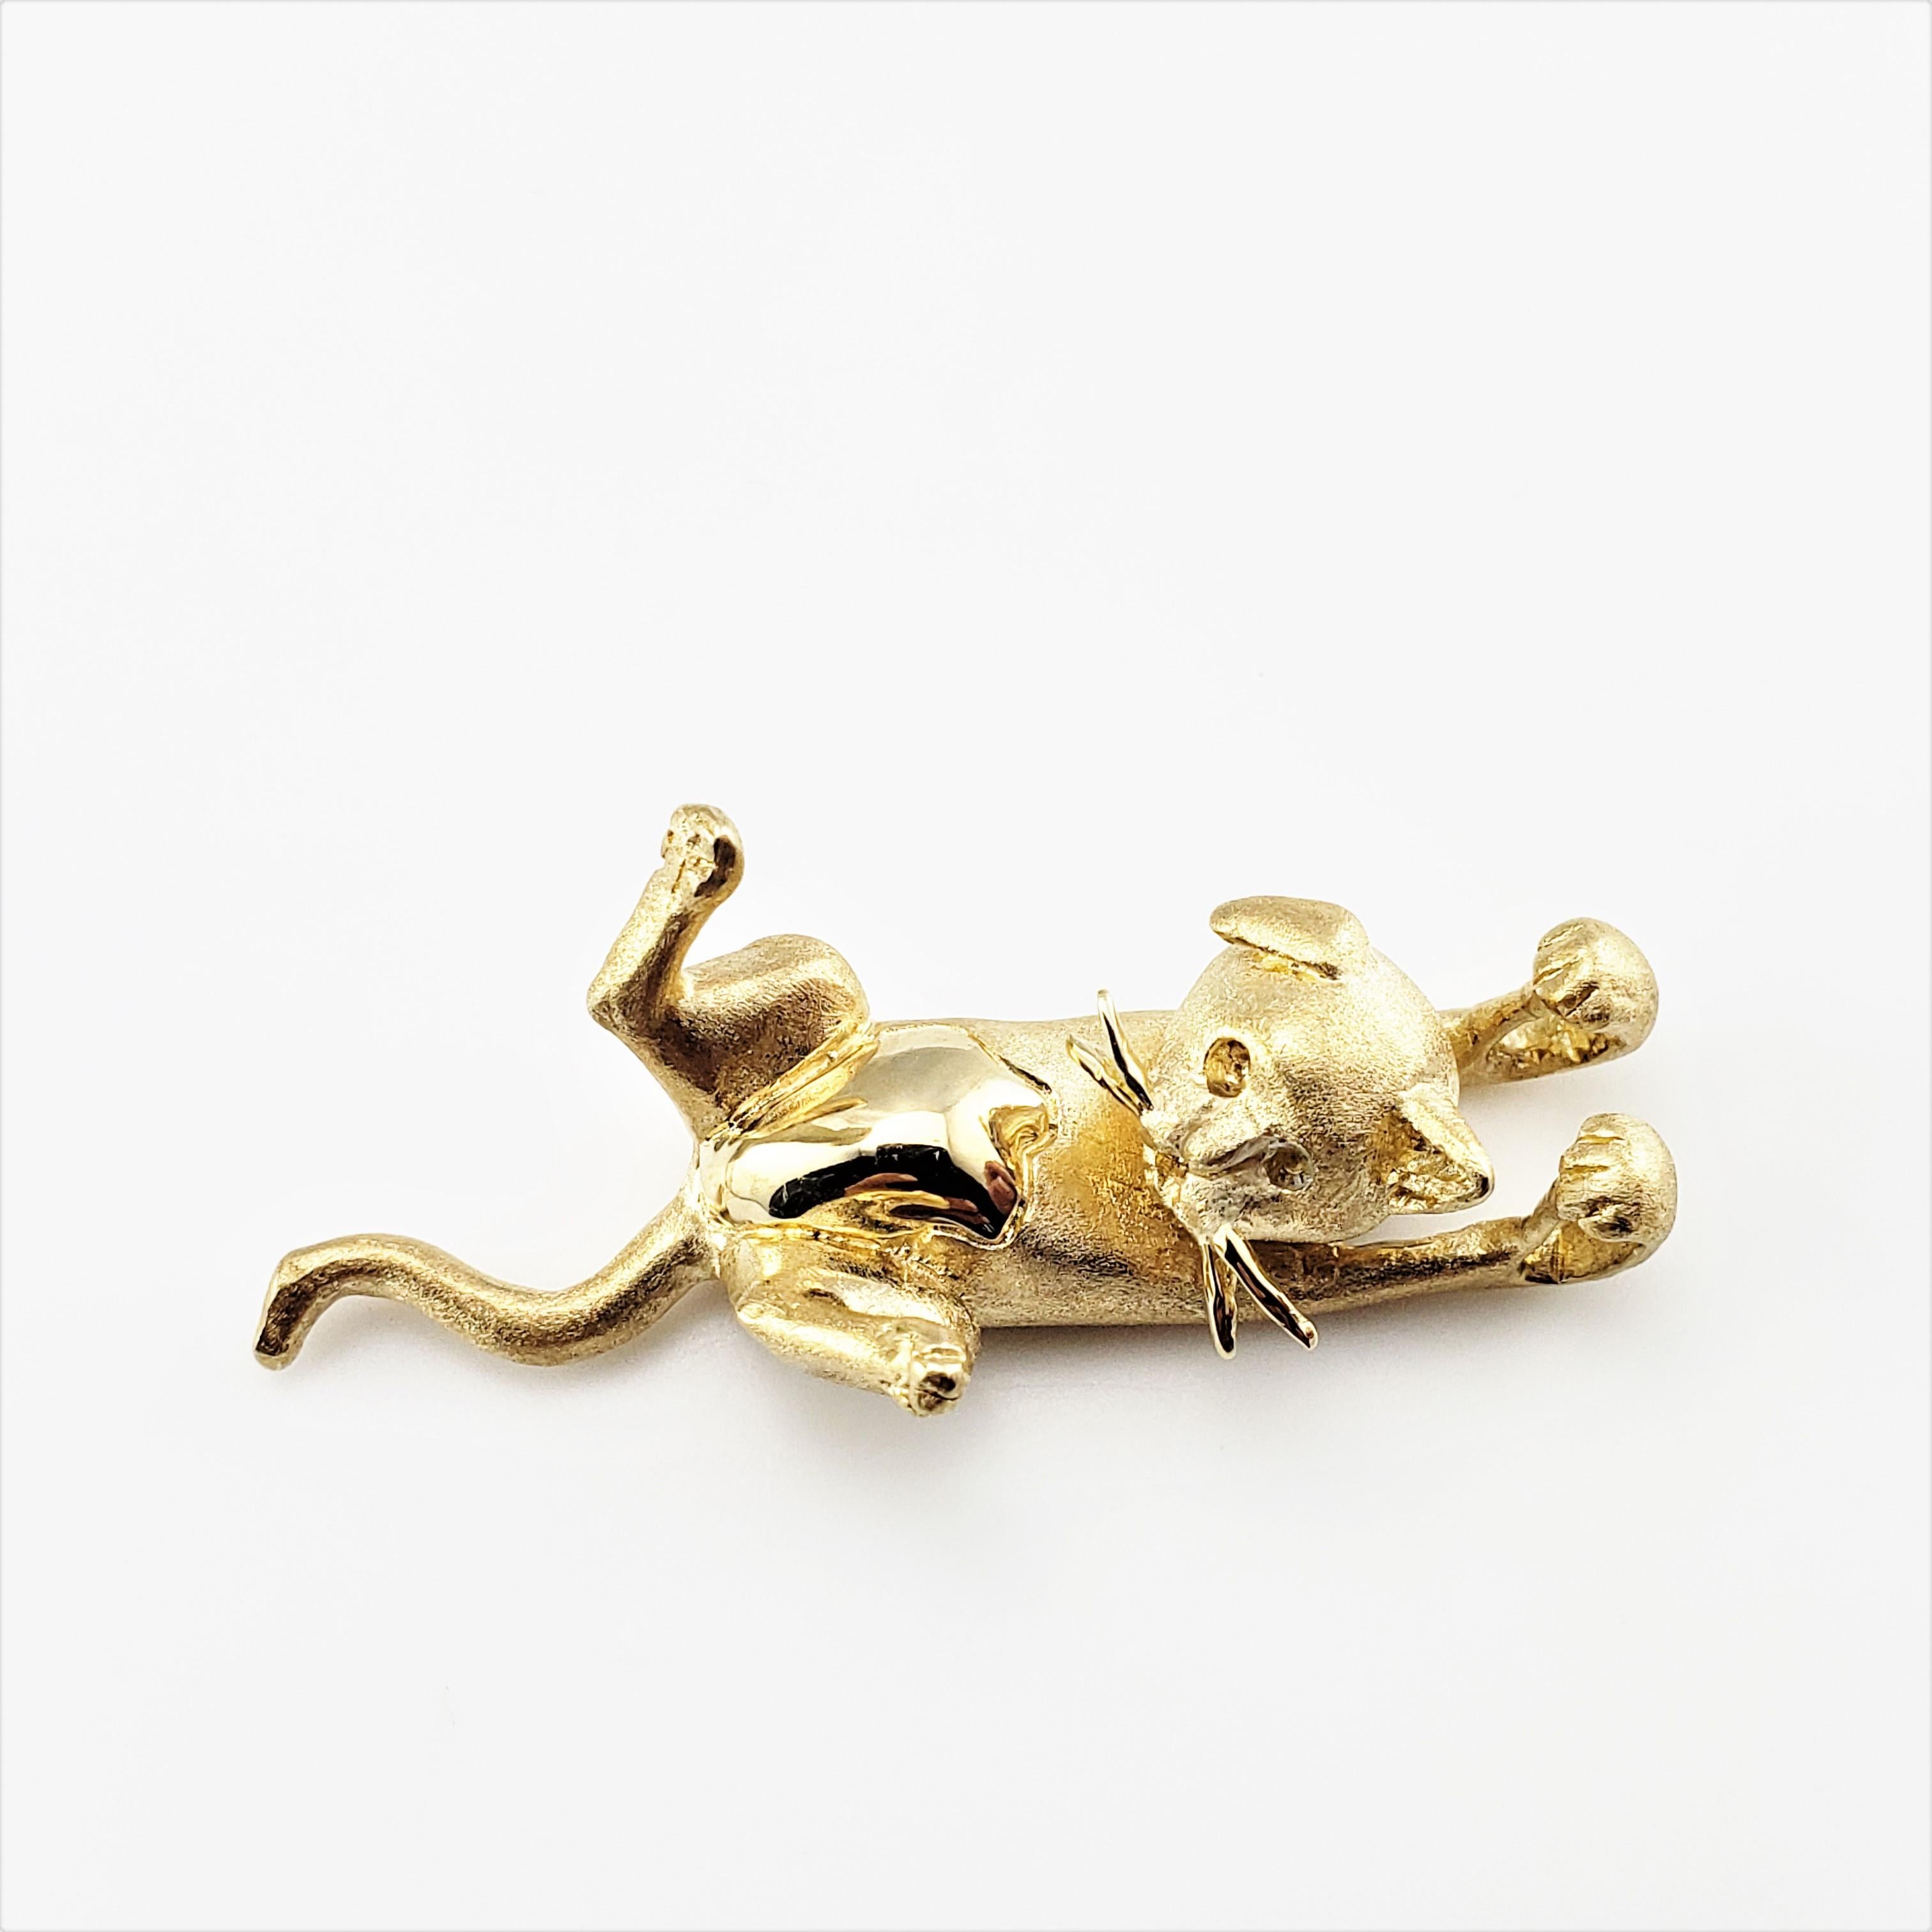 14 Karat Yellow Gold Cat Pendant-

This lovely 3D slide pendant features an adorable cat beautifully detailed in 14K yellow gold.

Size:  36 mm x  15 mm

Weight:  4.8 dwt. / 7.5 gr.

Stamped: 14K

Hallmark:  SLACK

*  Chain not included

Very good